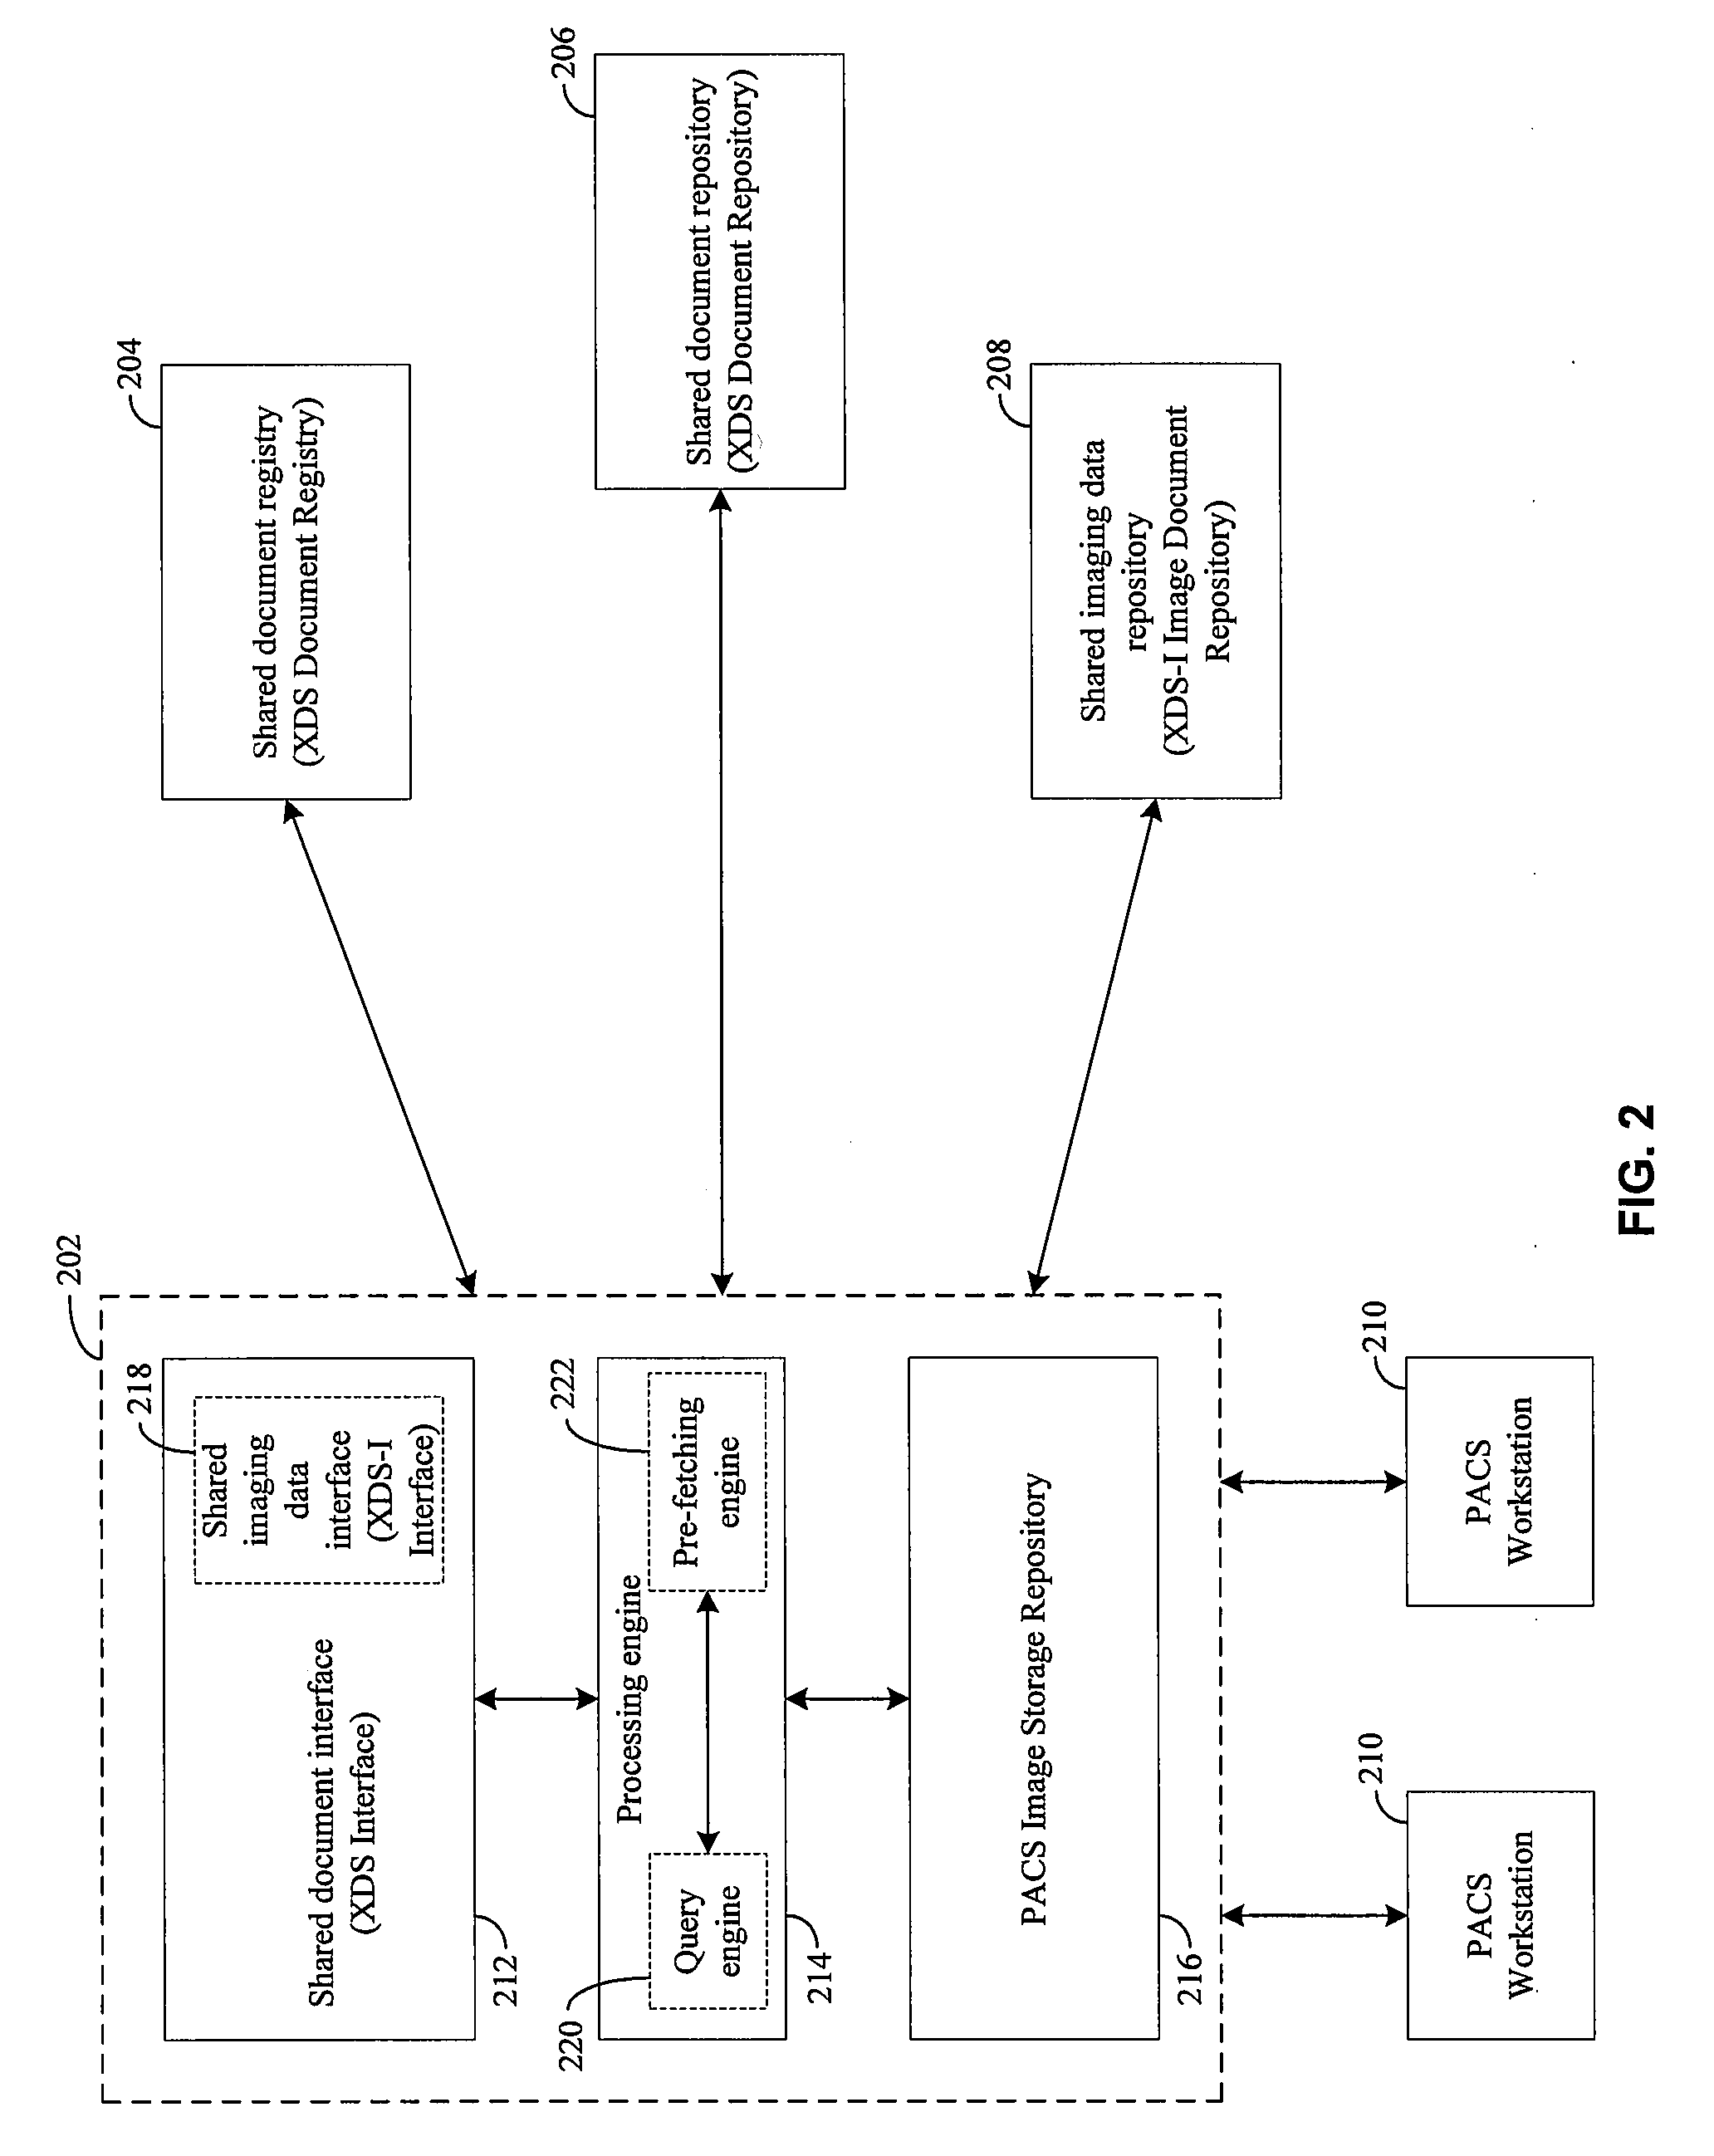 Method and system for pre-fetching relevant imaging information from multiple healthcare organizations